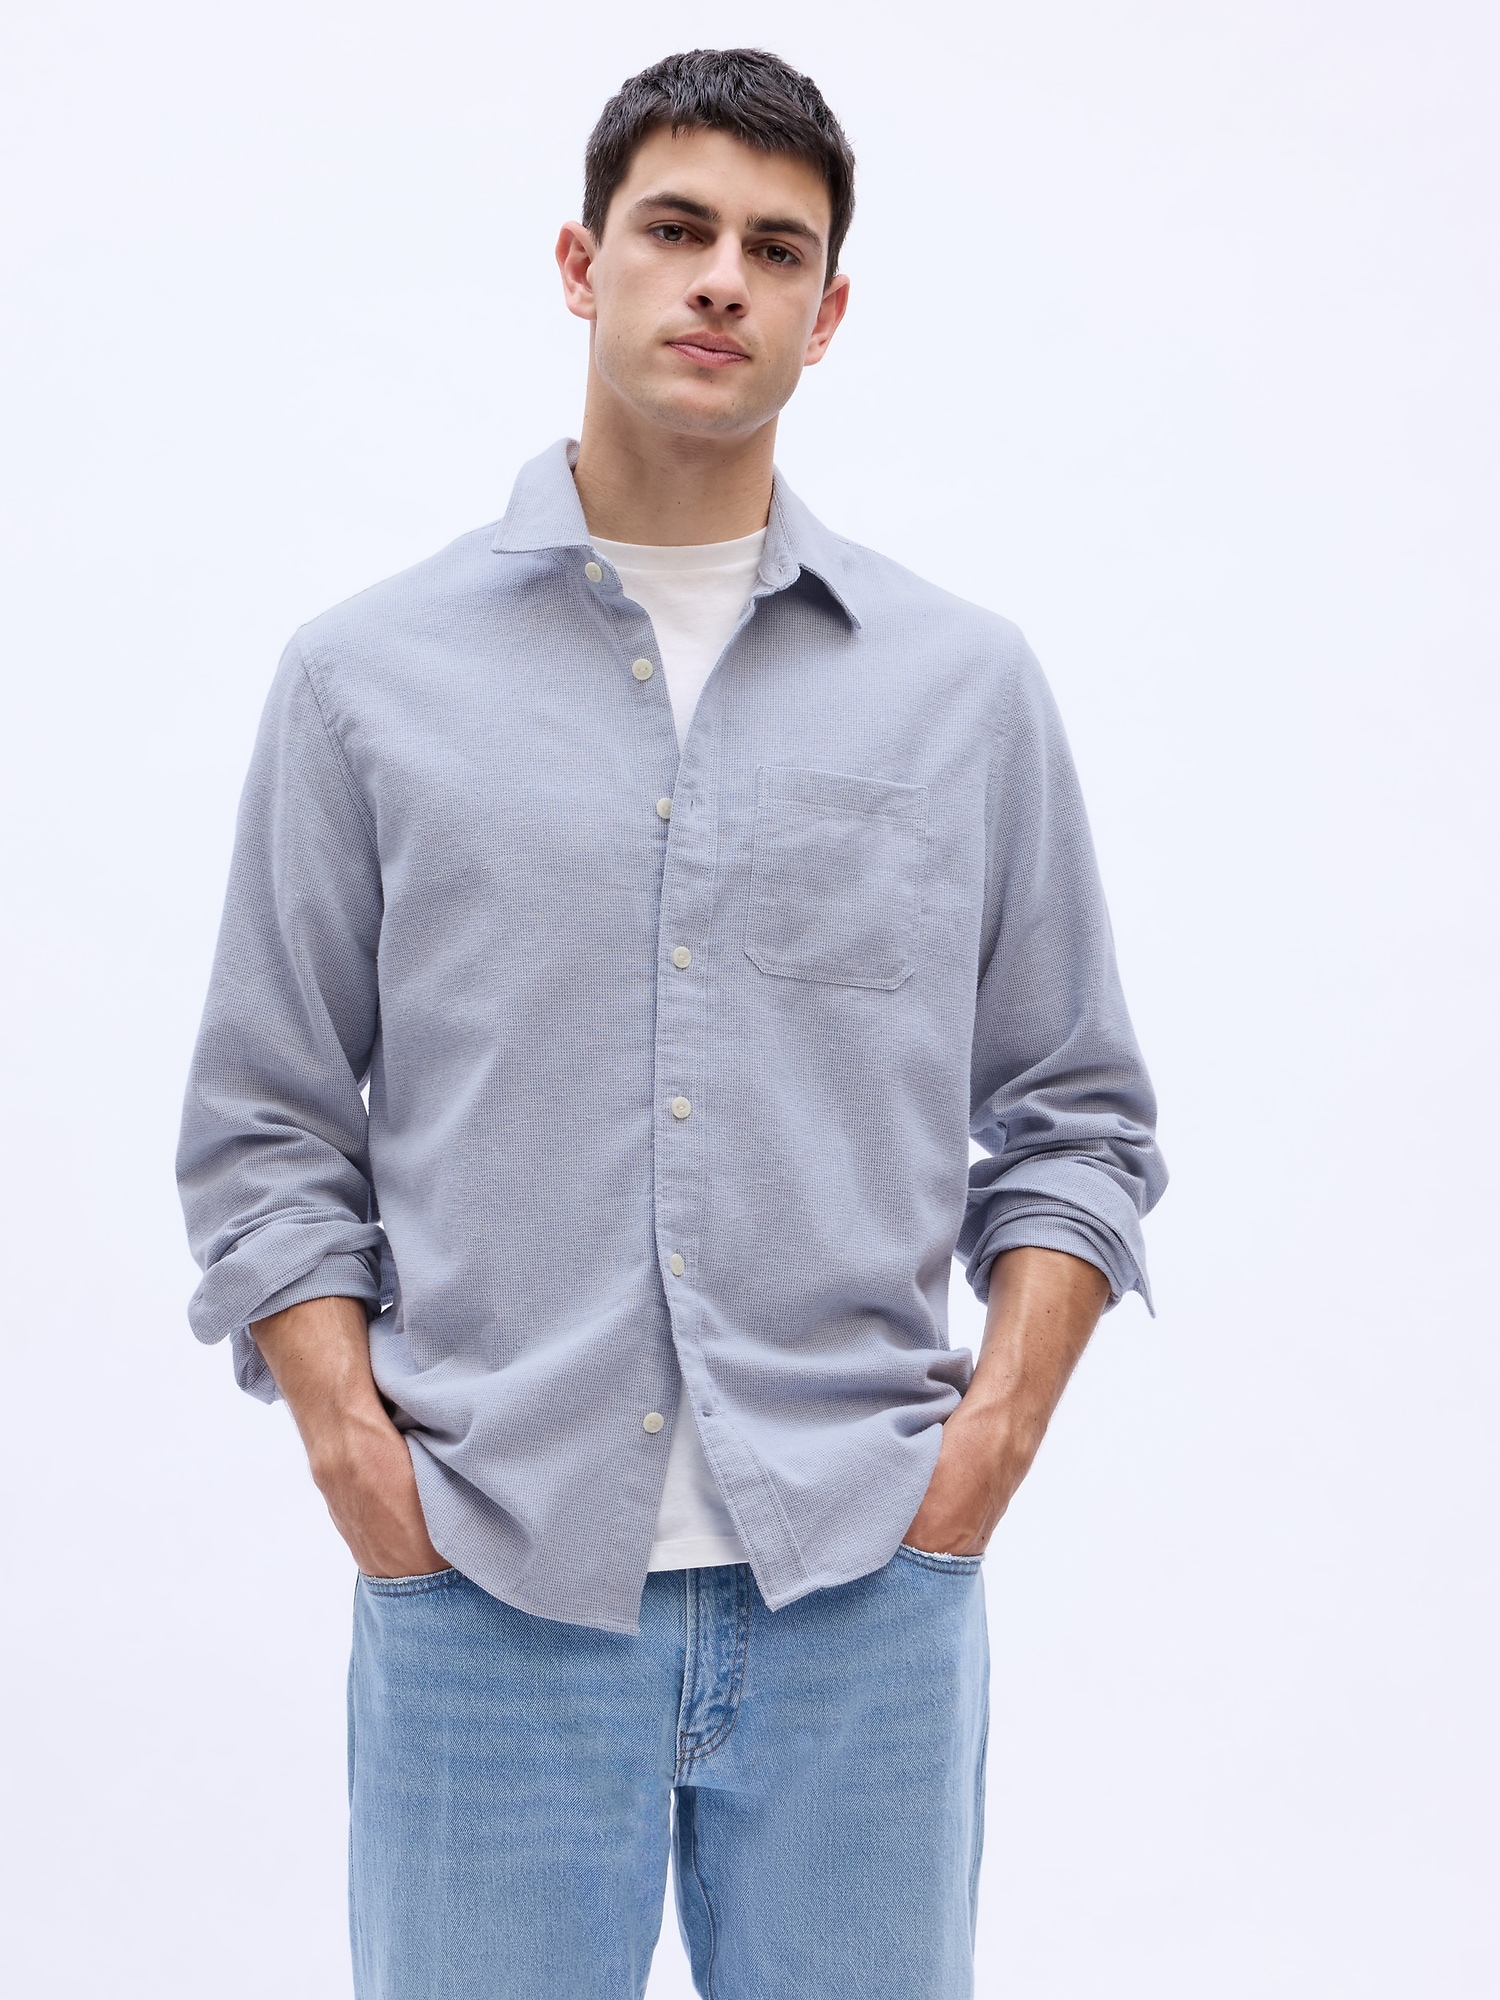 Flannel Shirt in Standard Fit